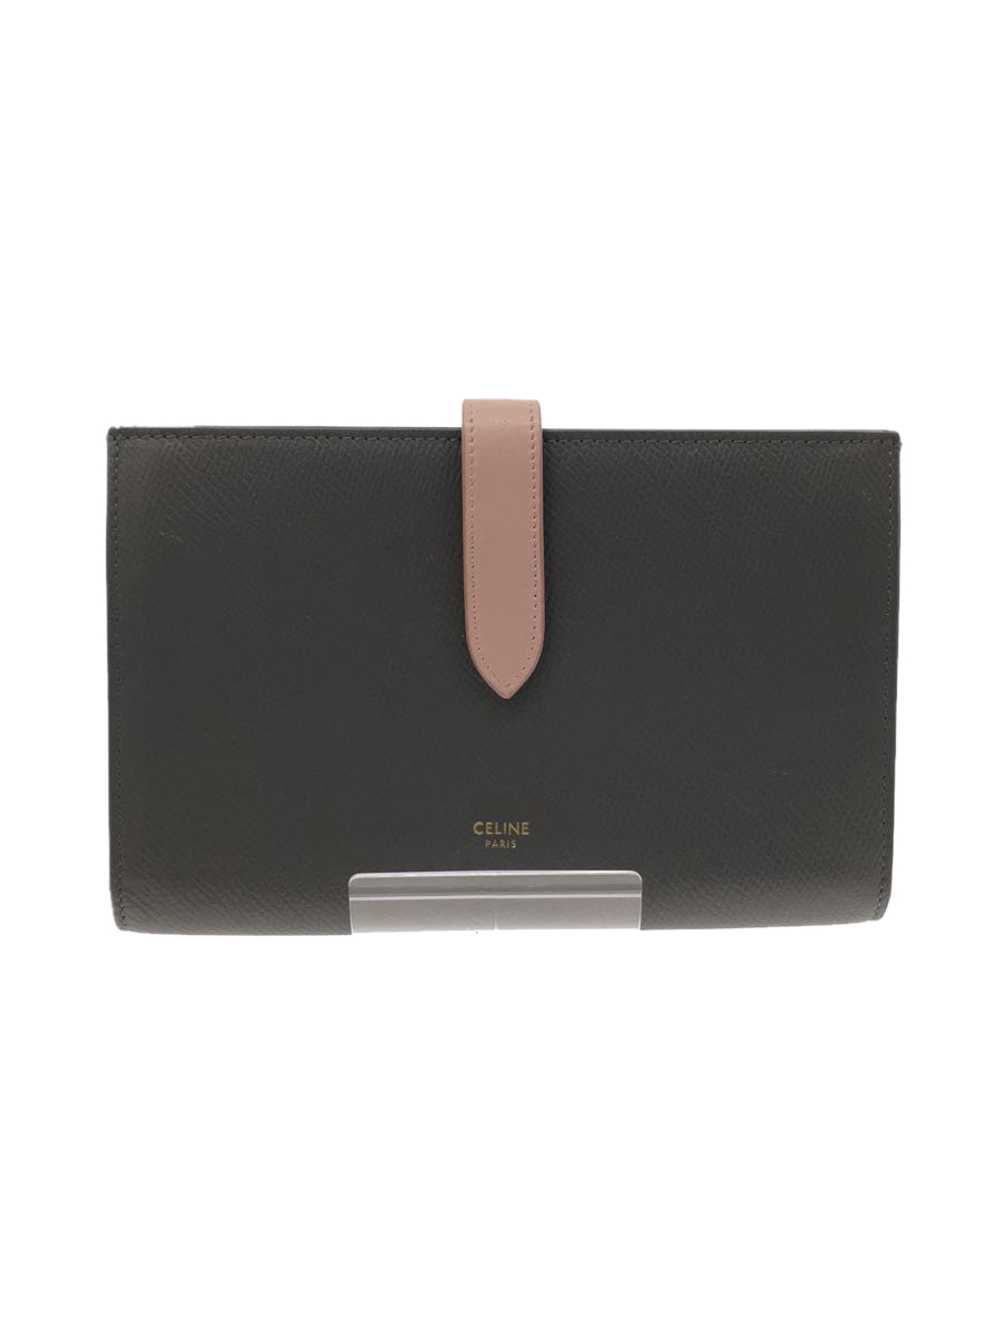 Celine Boxed Strap Wallet Large Gray Clothing Acc… - image 1